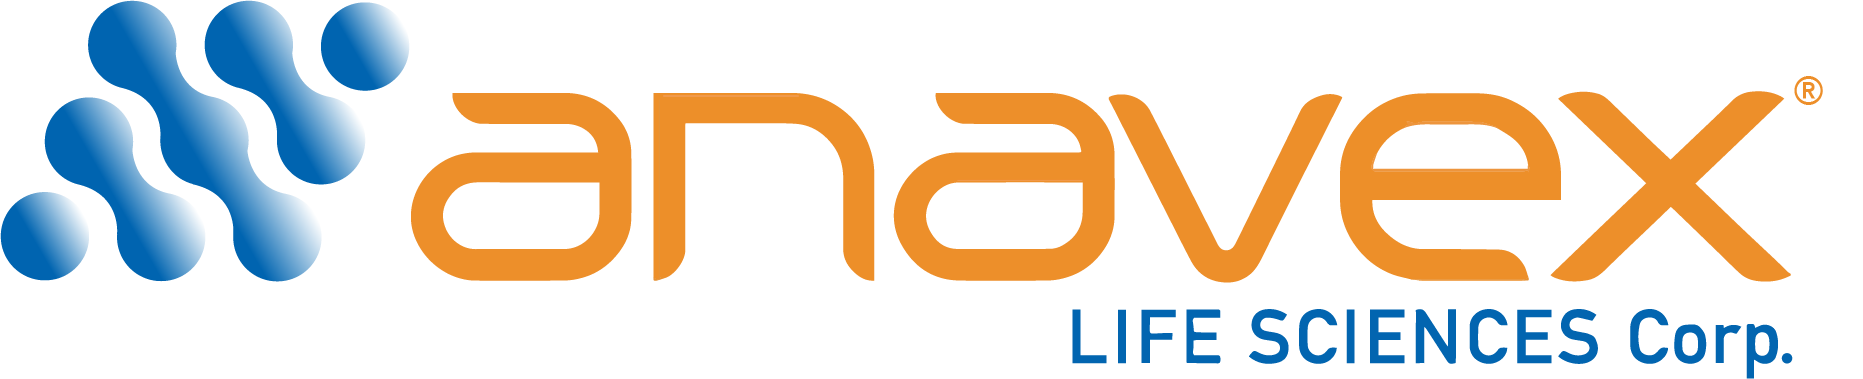 Anavex Life Sciences Announces Issuance of New U.S. Patent Expanding ANAVEX®2-73 (blarcamesine) Intellectual Property Portfolio for the Treatment of Hypertension